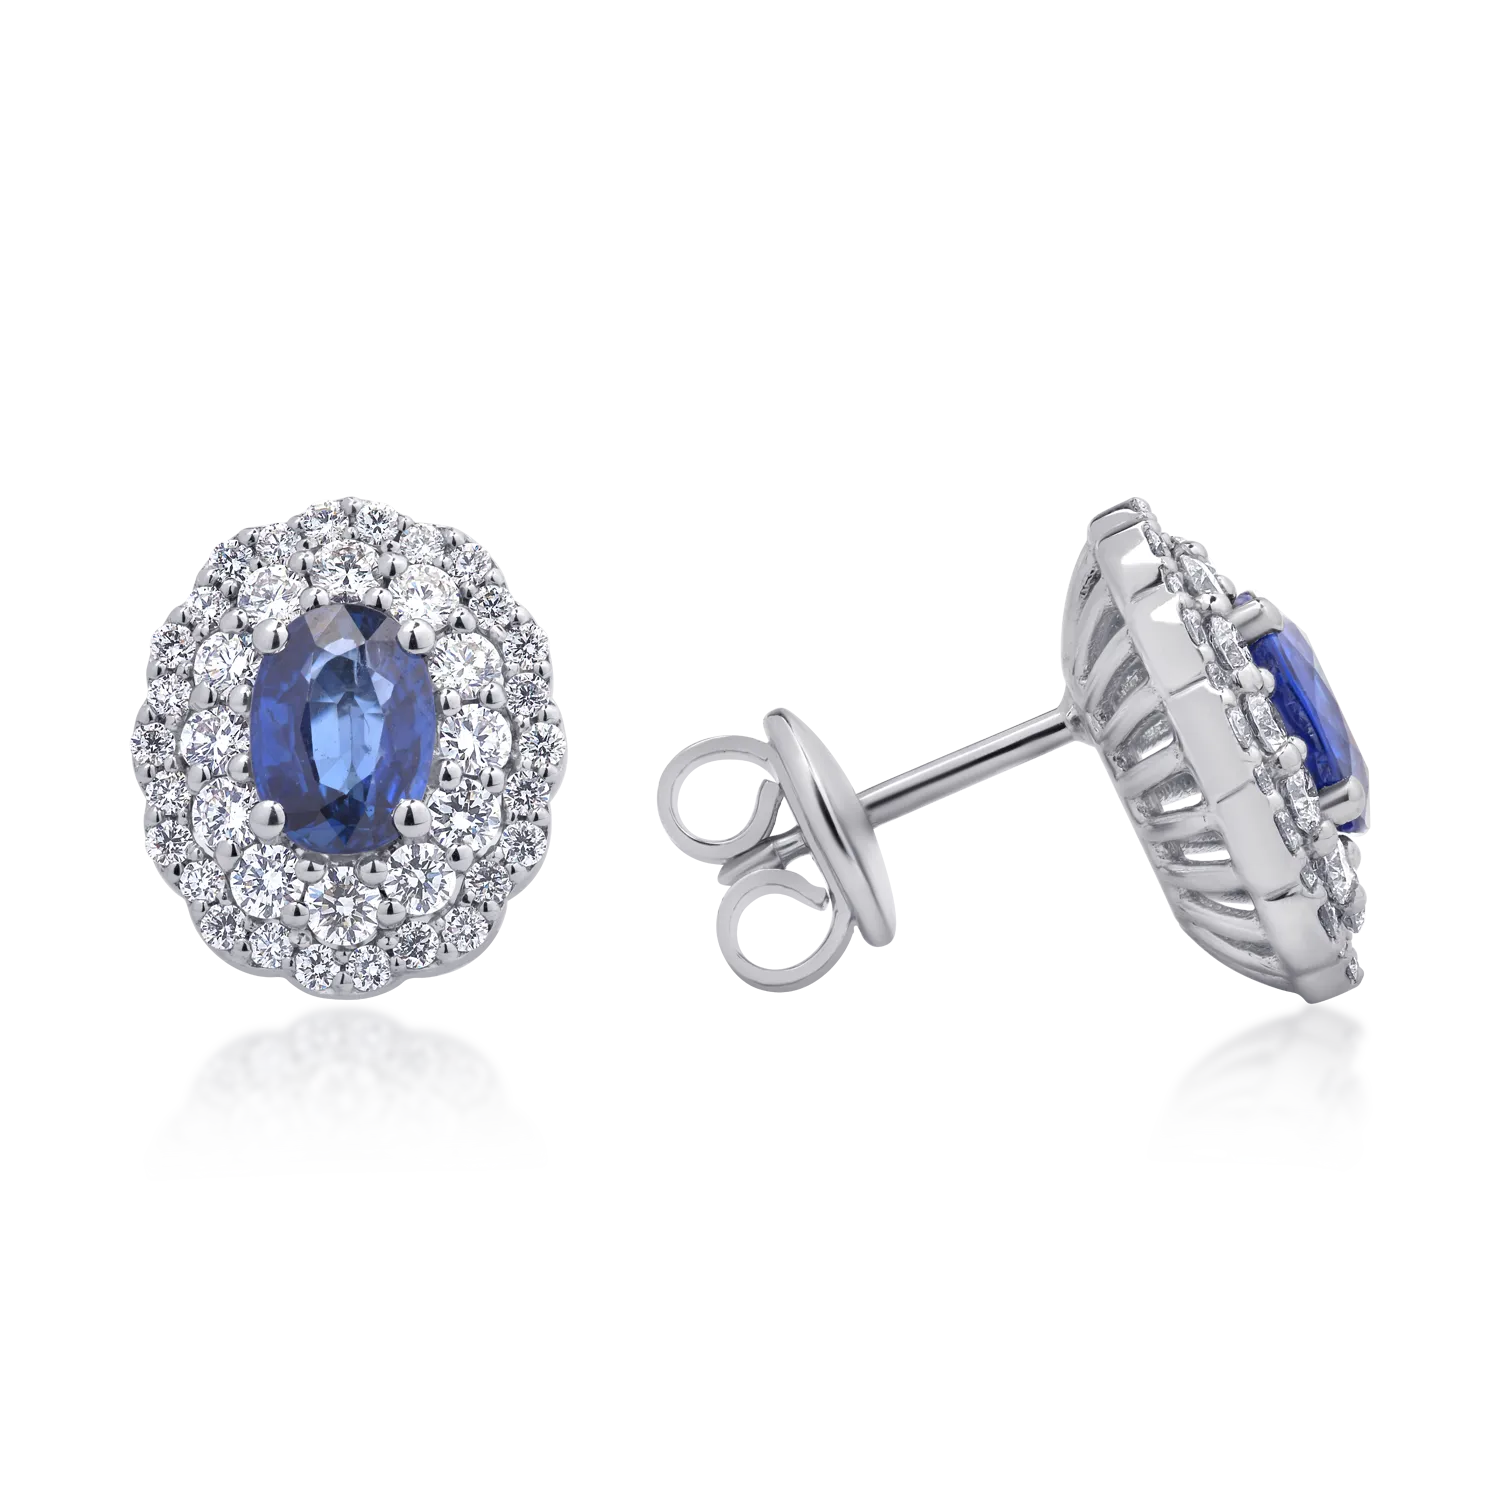 18K white gold earrings with 2.02ct sapphires and 1.13ct diamonds